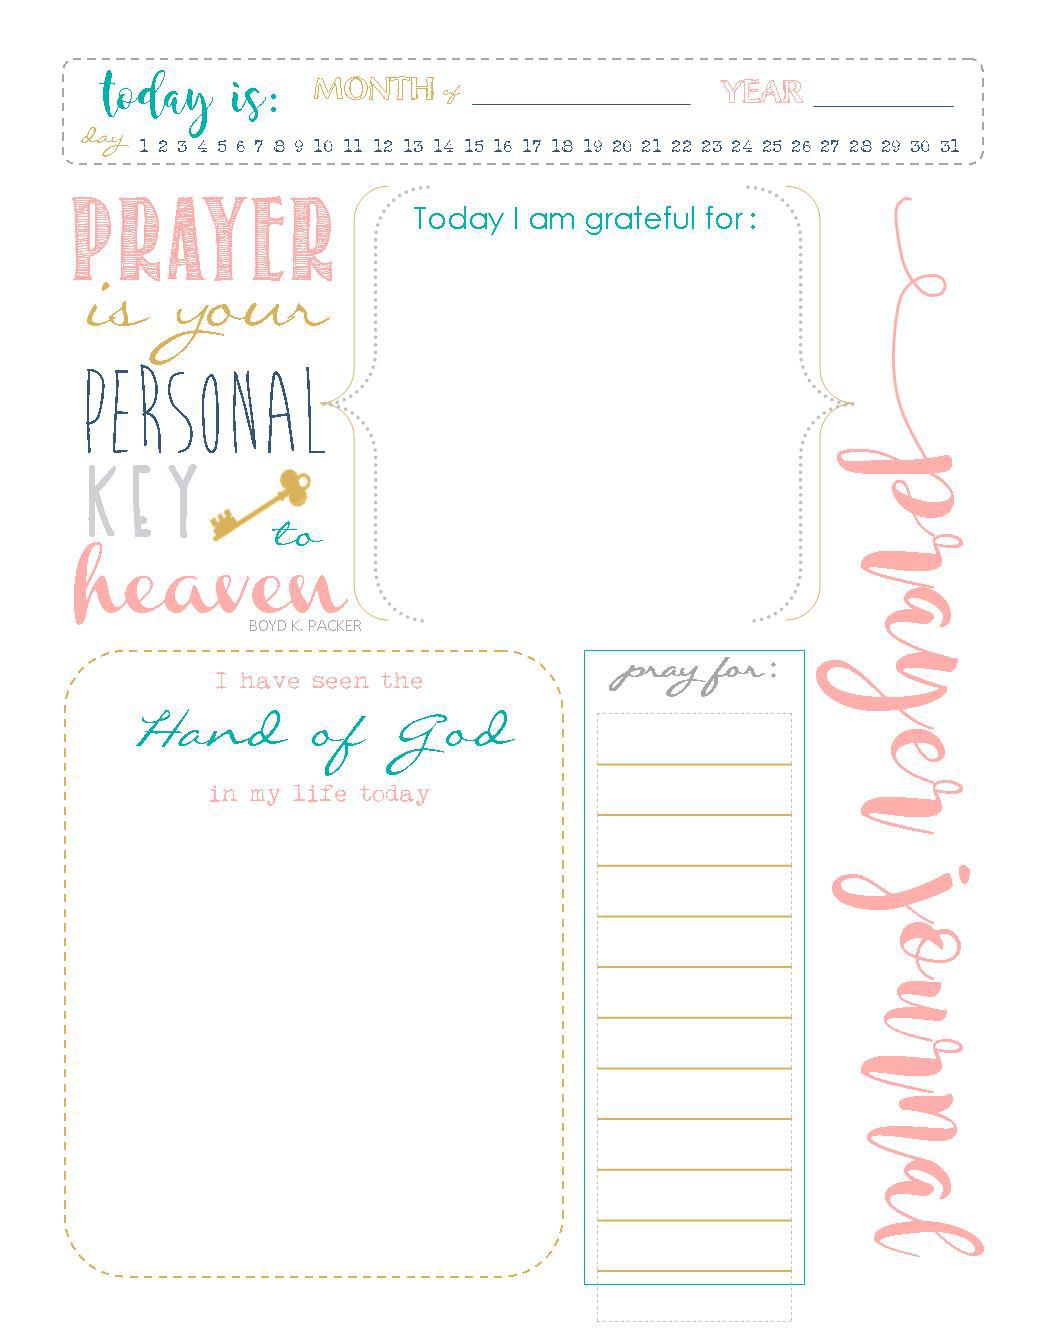 Start a PRAYER JOURNAL for More Meaningful Prayers: FREE PRINTABLES!!!